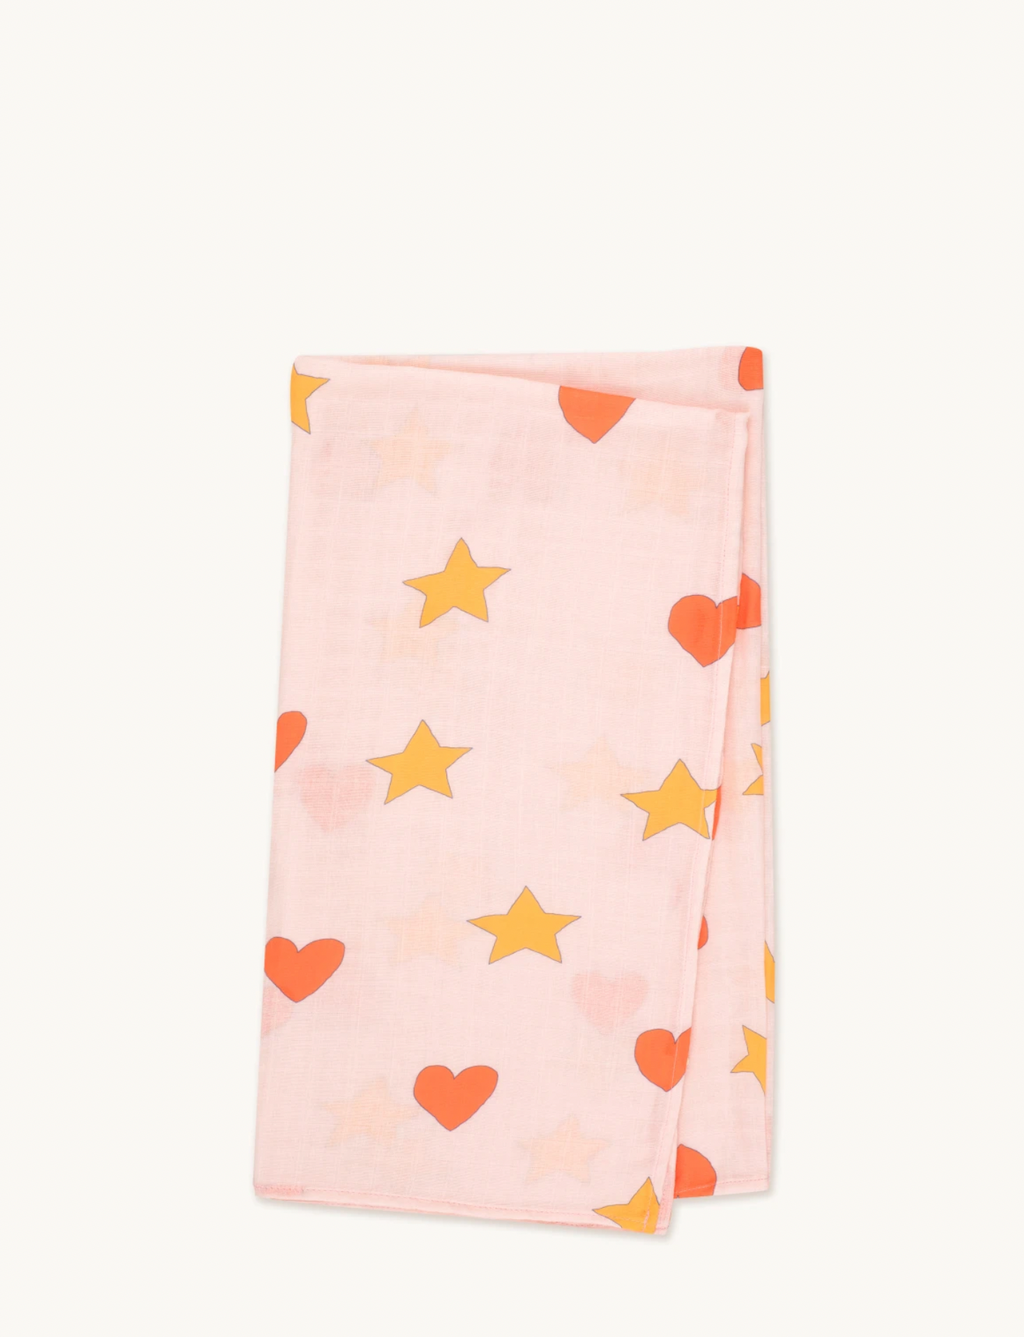 Tiny Cottons Hearts & Stars Swaddle - Pastel Pink